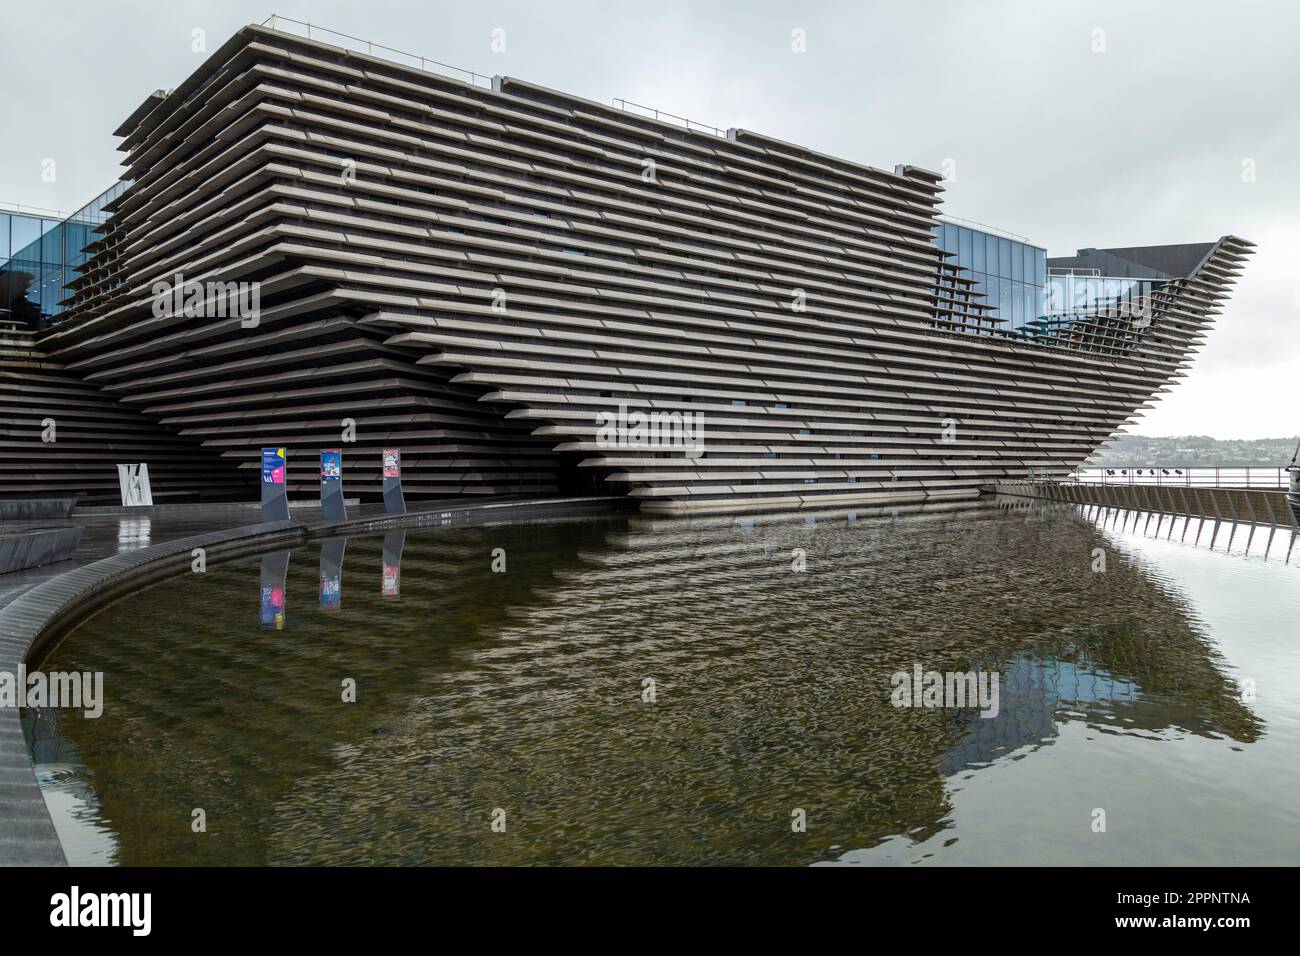 The V&A museum in Dundee Scotland Stock Photo